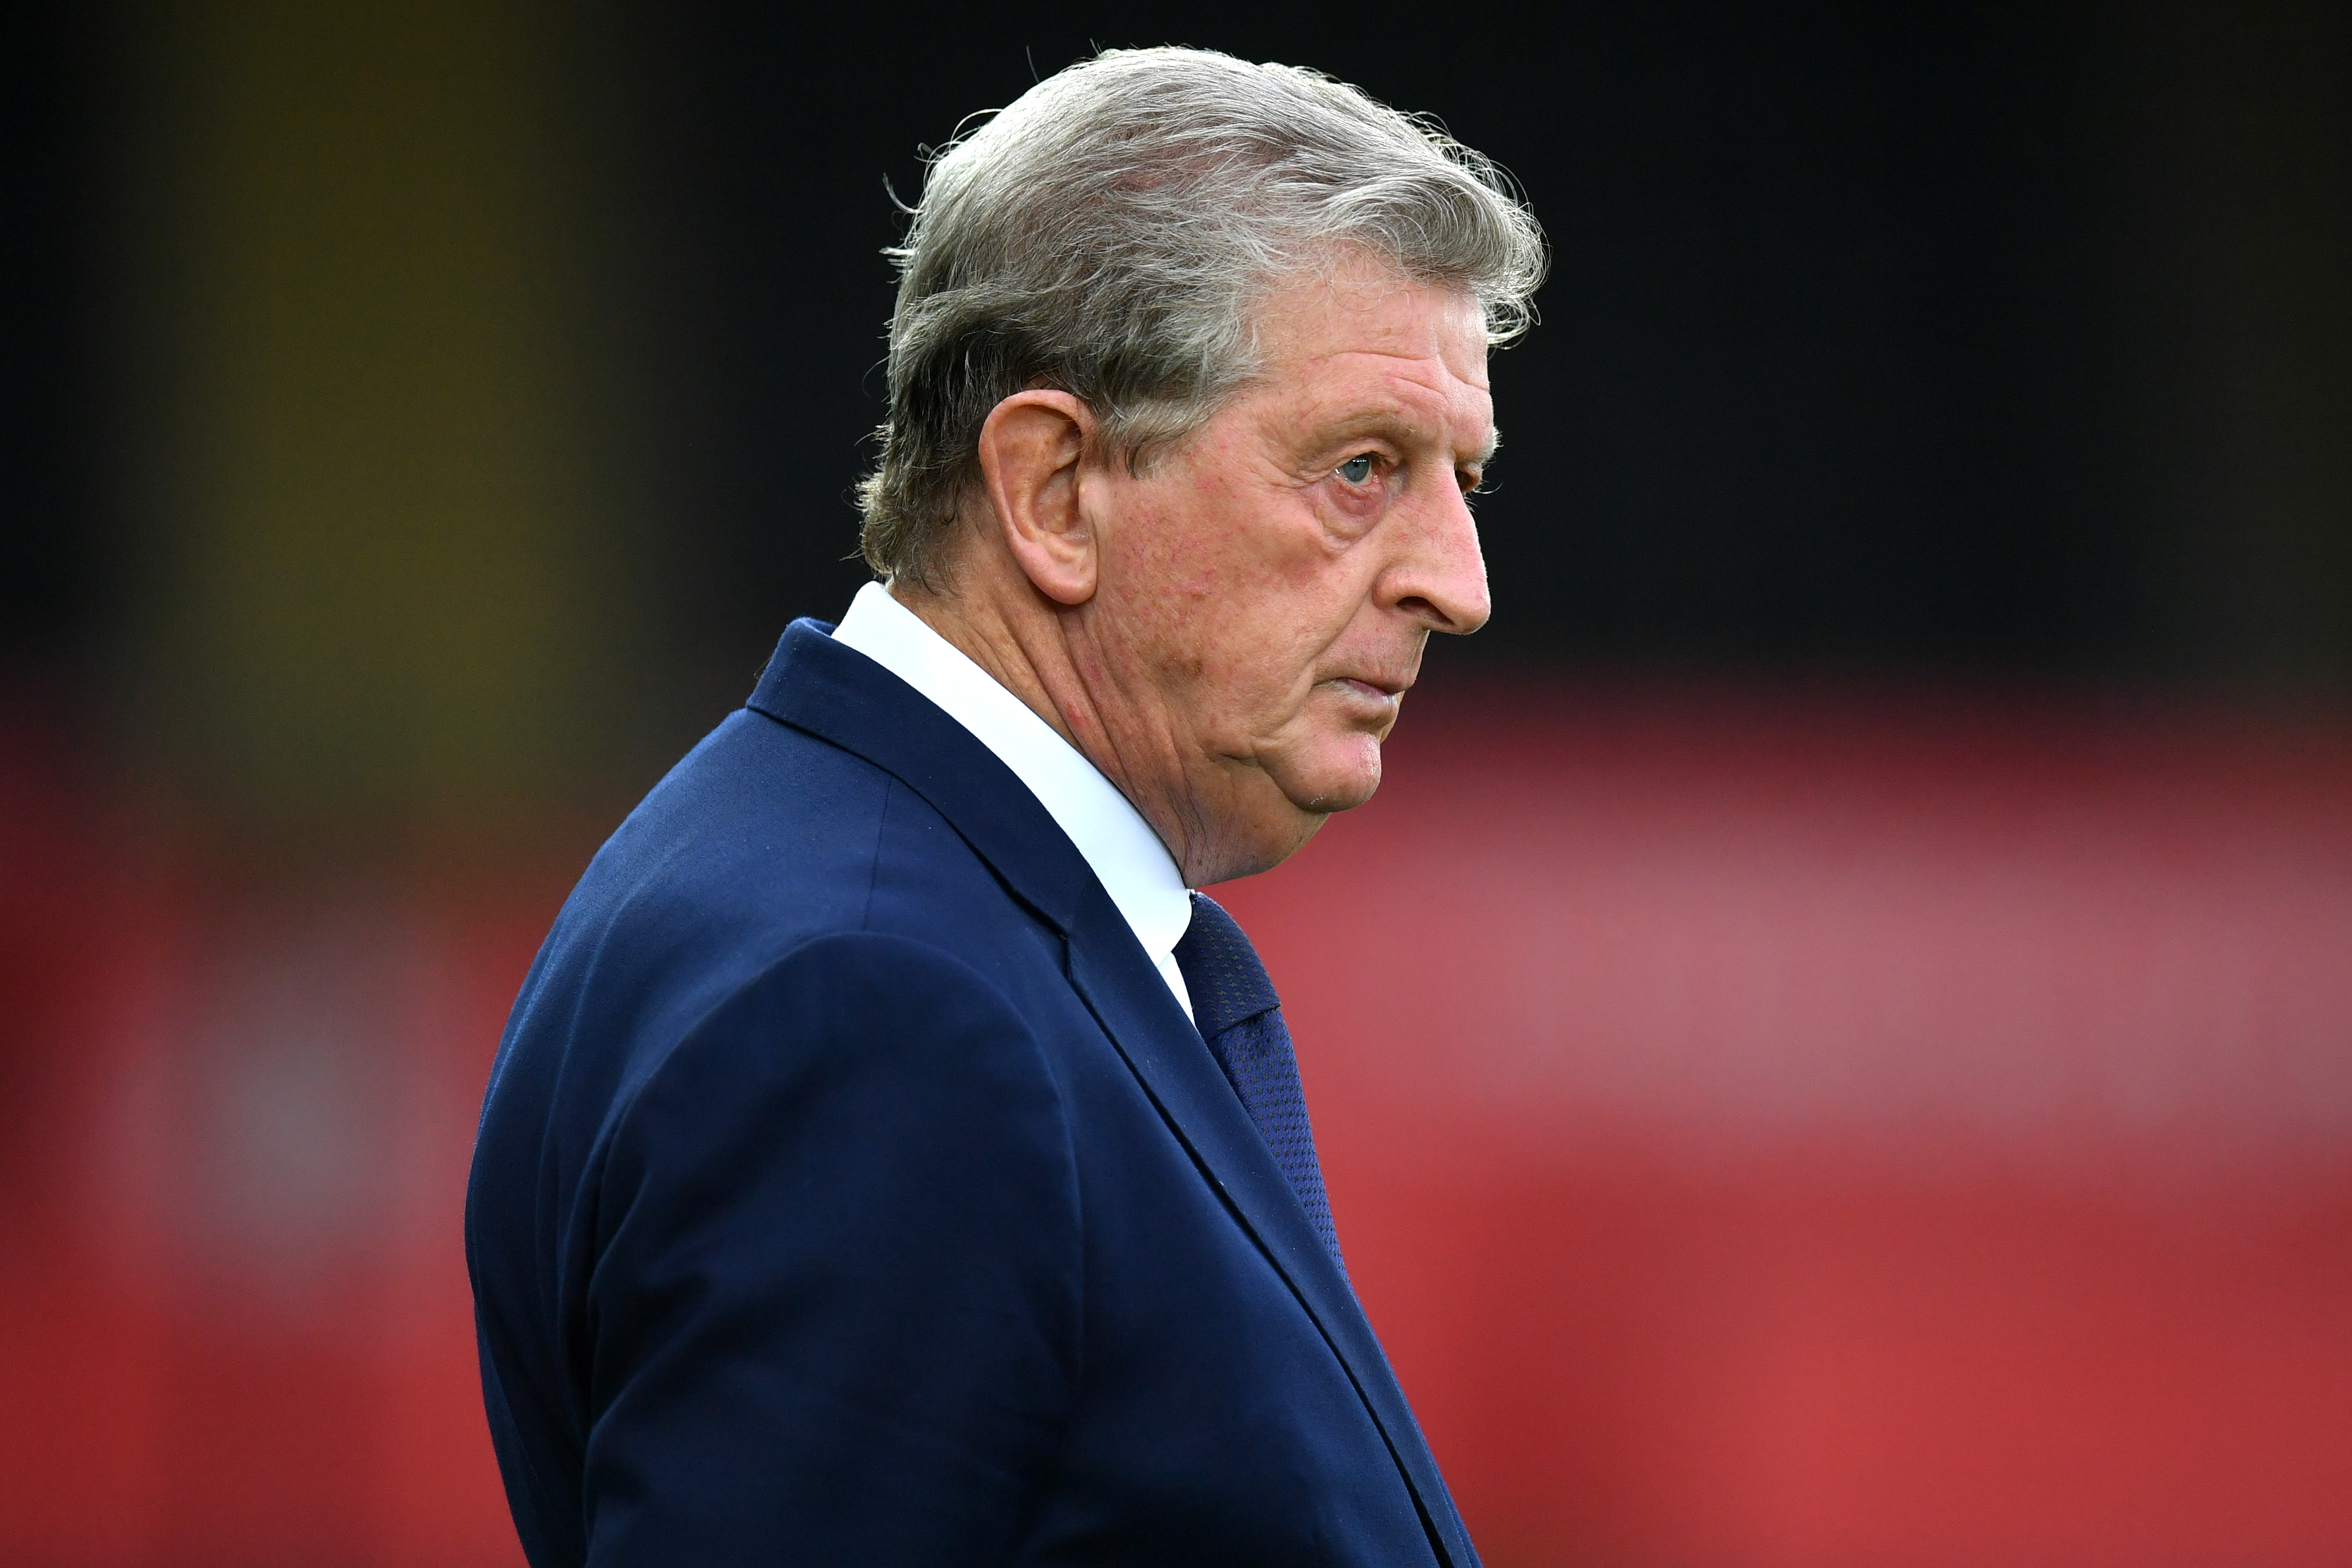 Swansea City v Crystal Palace - Carabao Cup Second Round